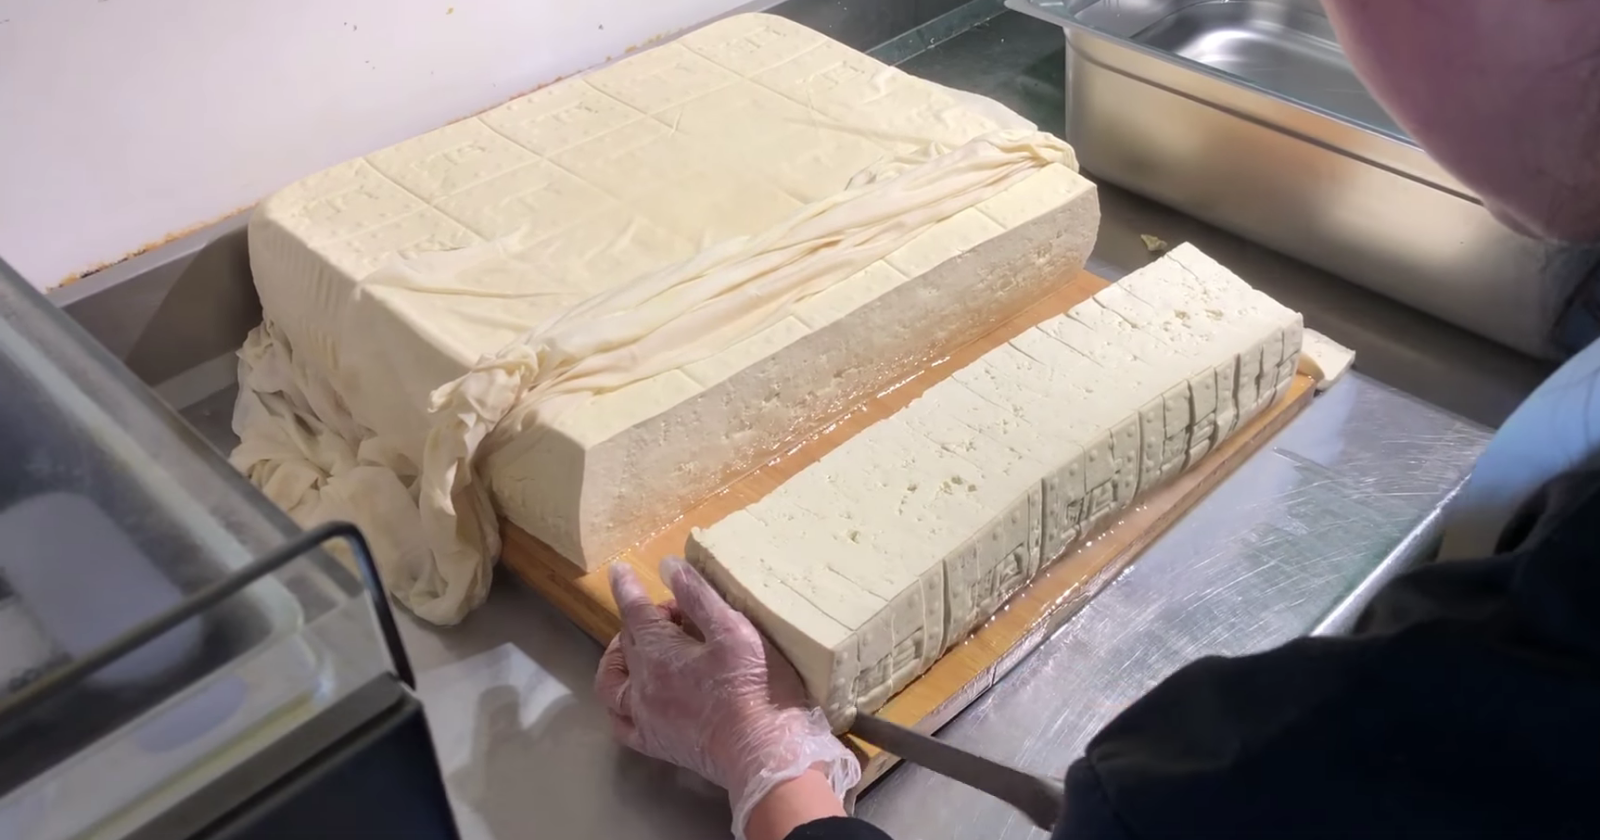 VIDEO.  This organic tofu from Touraine is made according to a traditional Chinese recipe